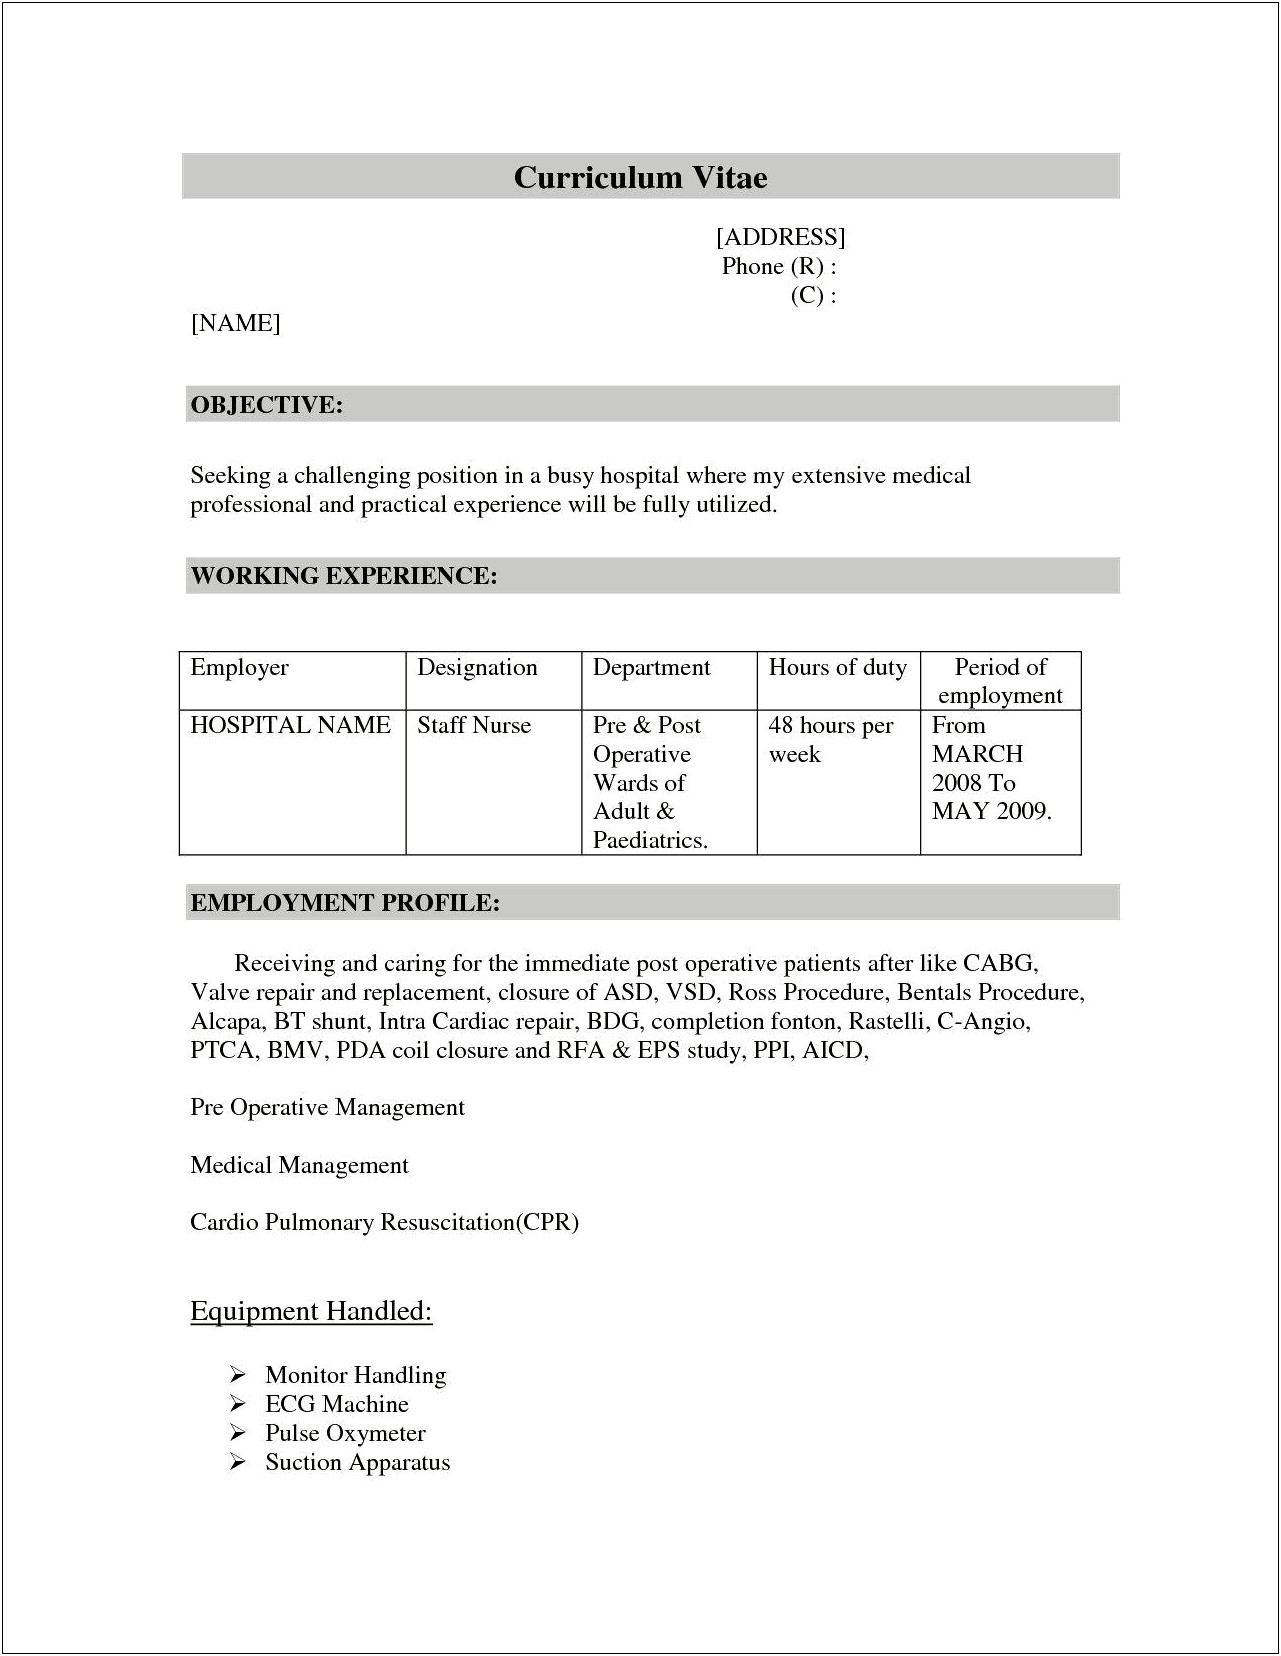 Resume After 1 Year Work Experience